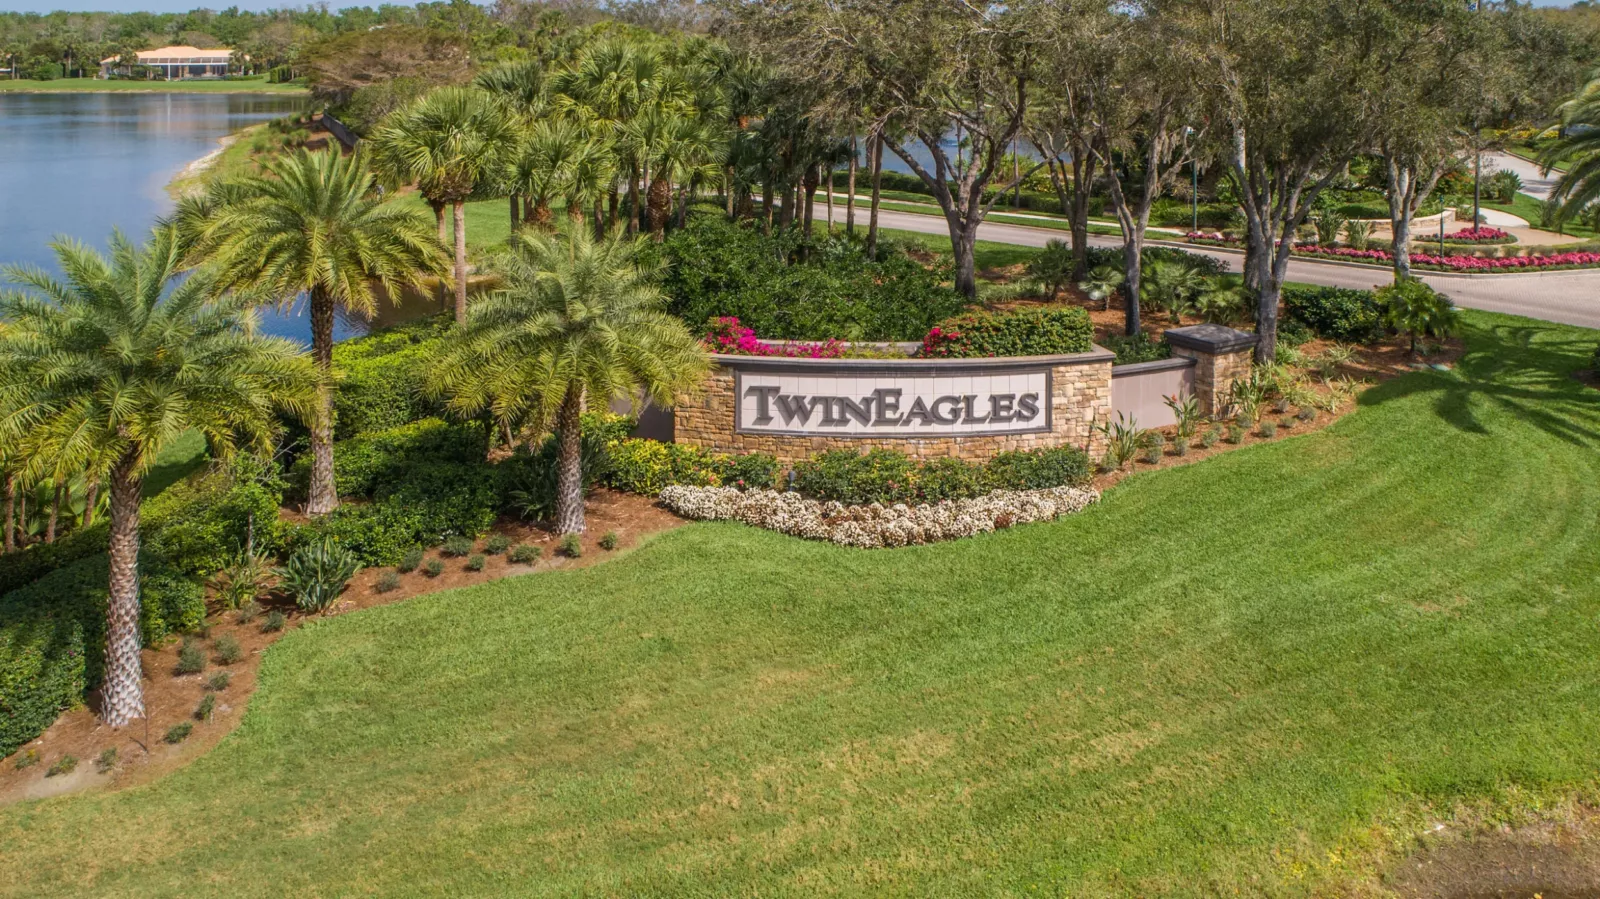 Twin Eagles Naples Sign